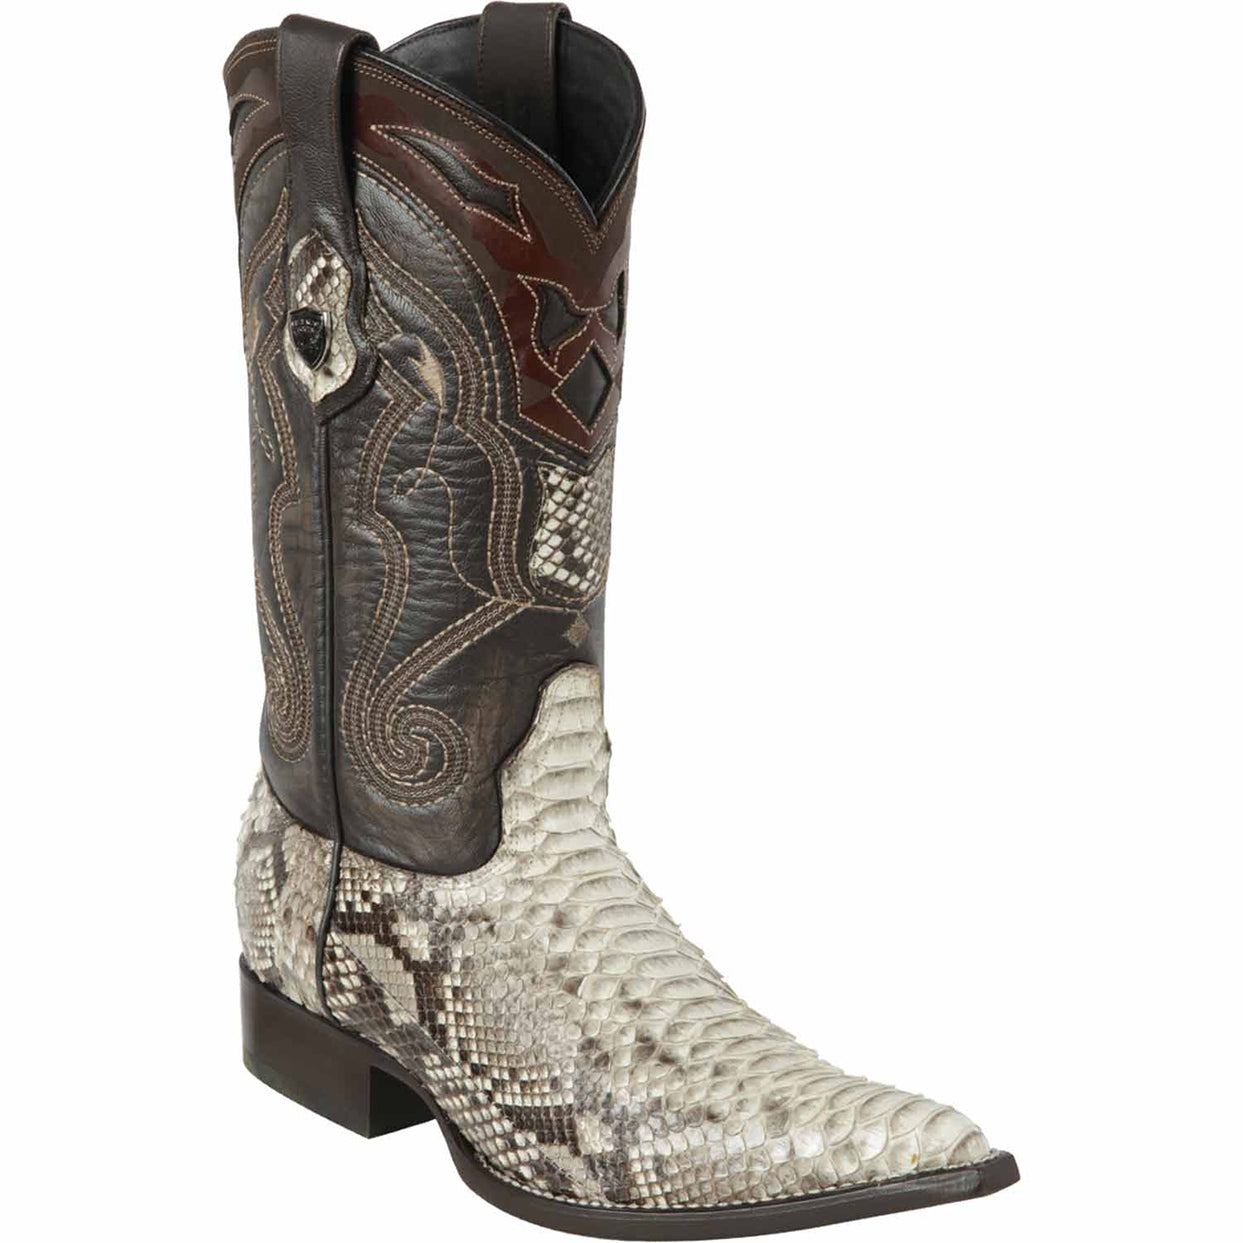 Natural Python Snakeskin Cowboy Boots - Pointy Toe